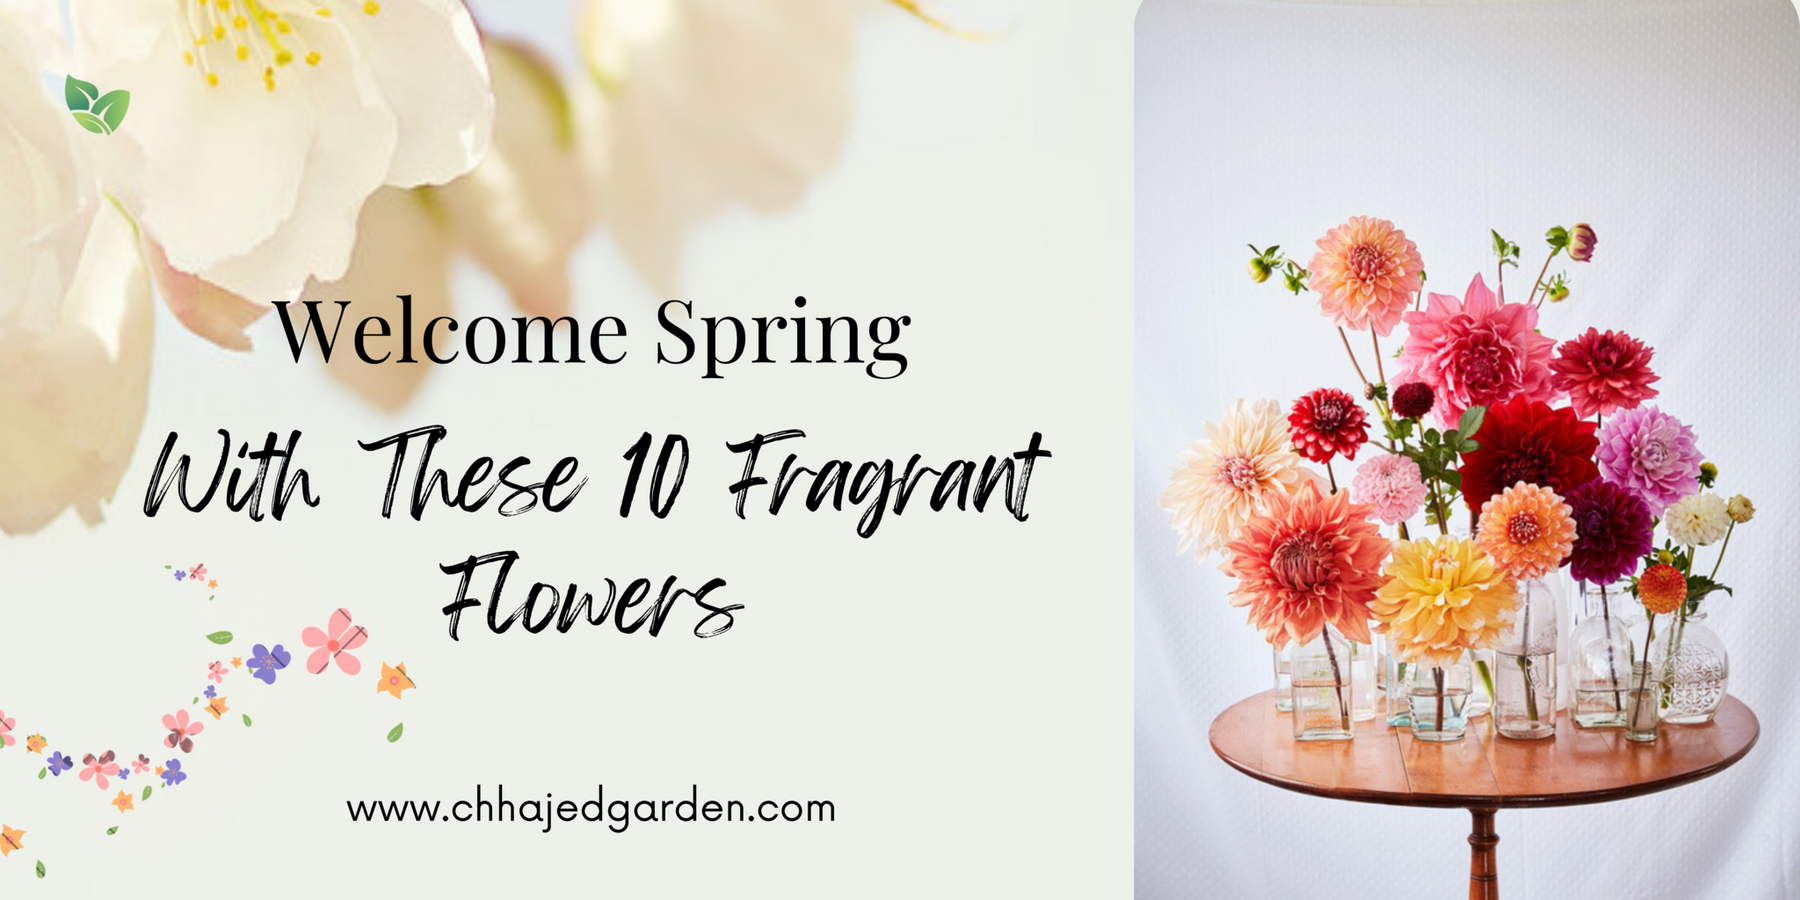 A Fragrant Garden: Top 10 Flowers to Plant for a Sweet-Smelling Oasis